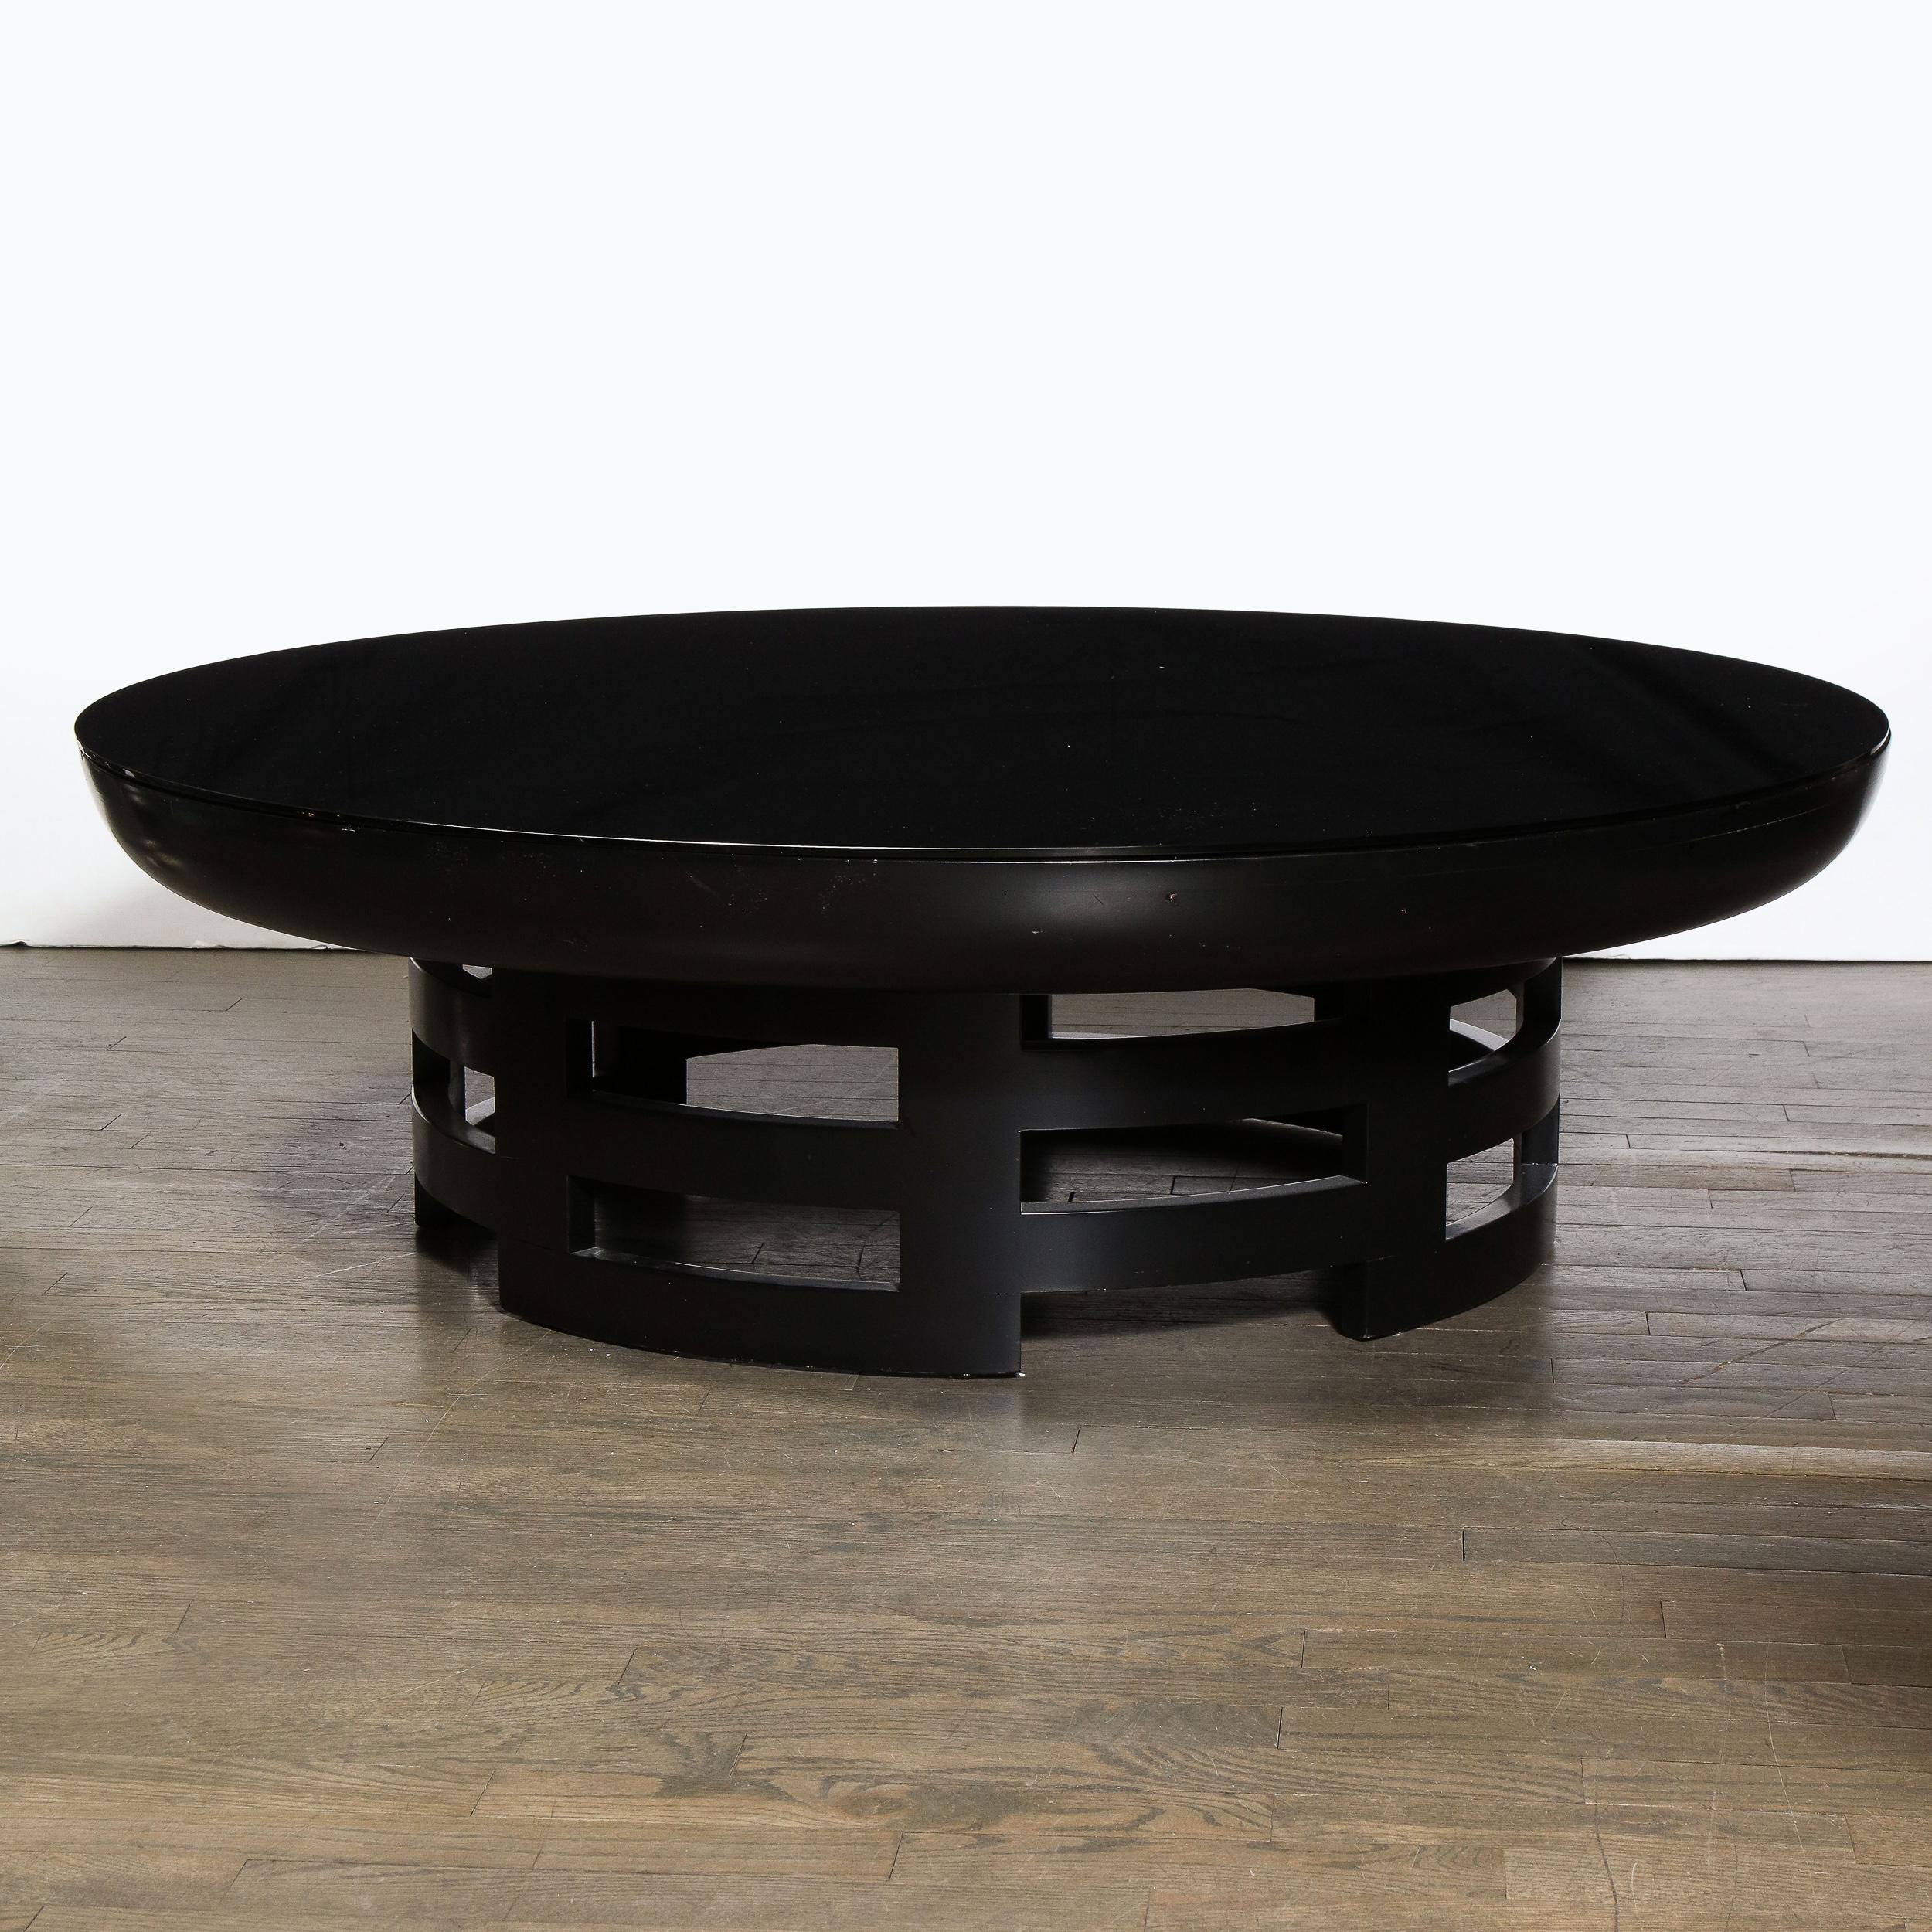 This elegant Mid-Century Modern cocktail table was realized the esteemed Muller & Barringer for Kittinger in the United States, circa 1950. It features a sculptural rectilinear base in ebonized walnut consisting of adjoining rectilinear forms that